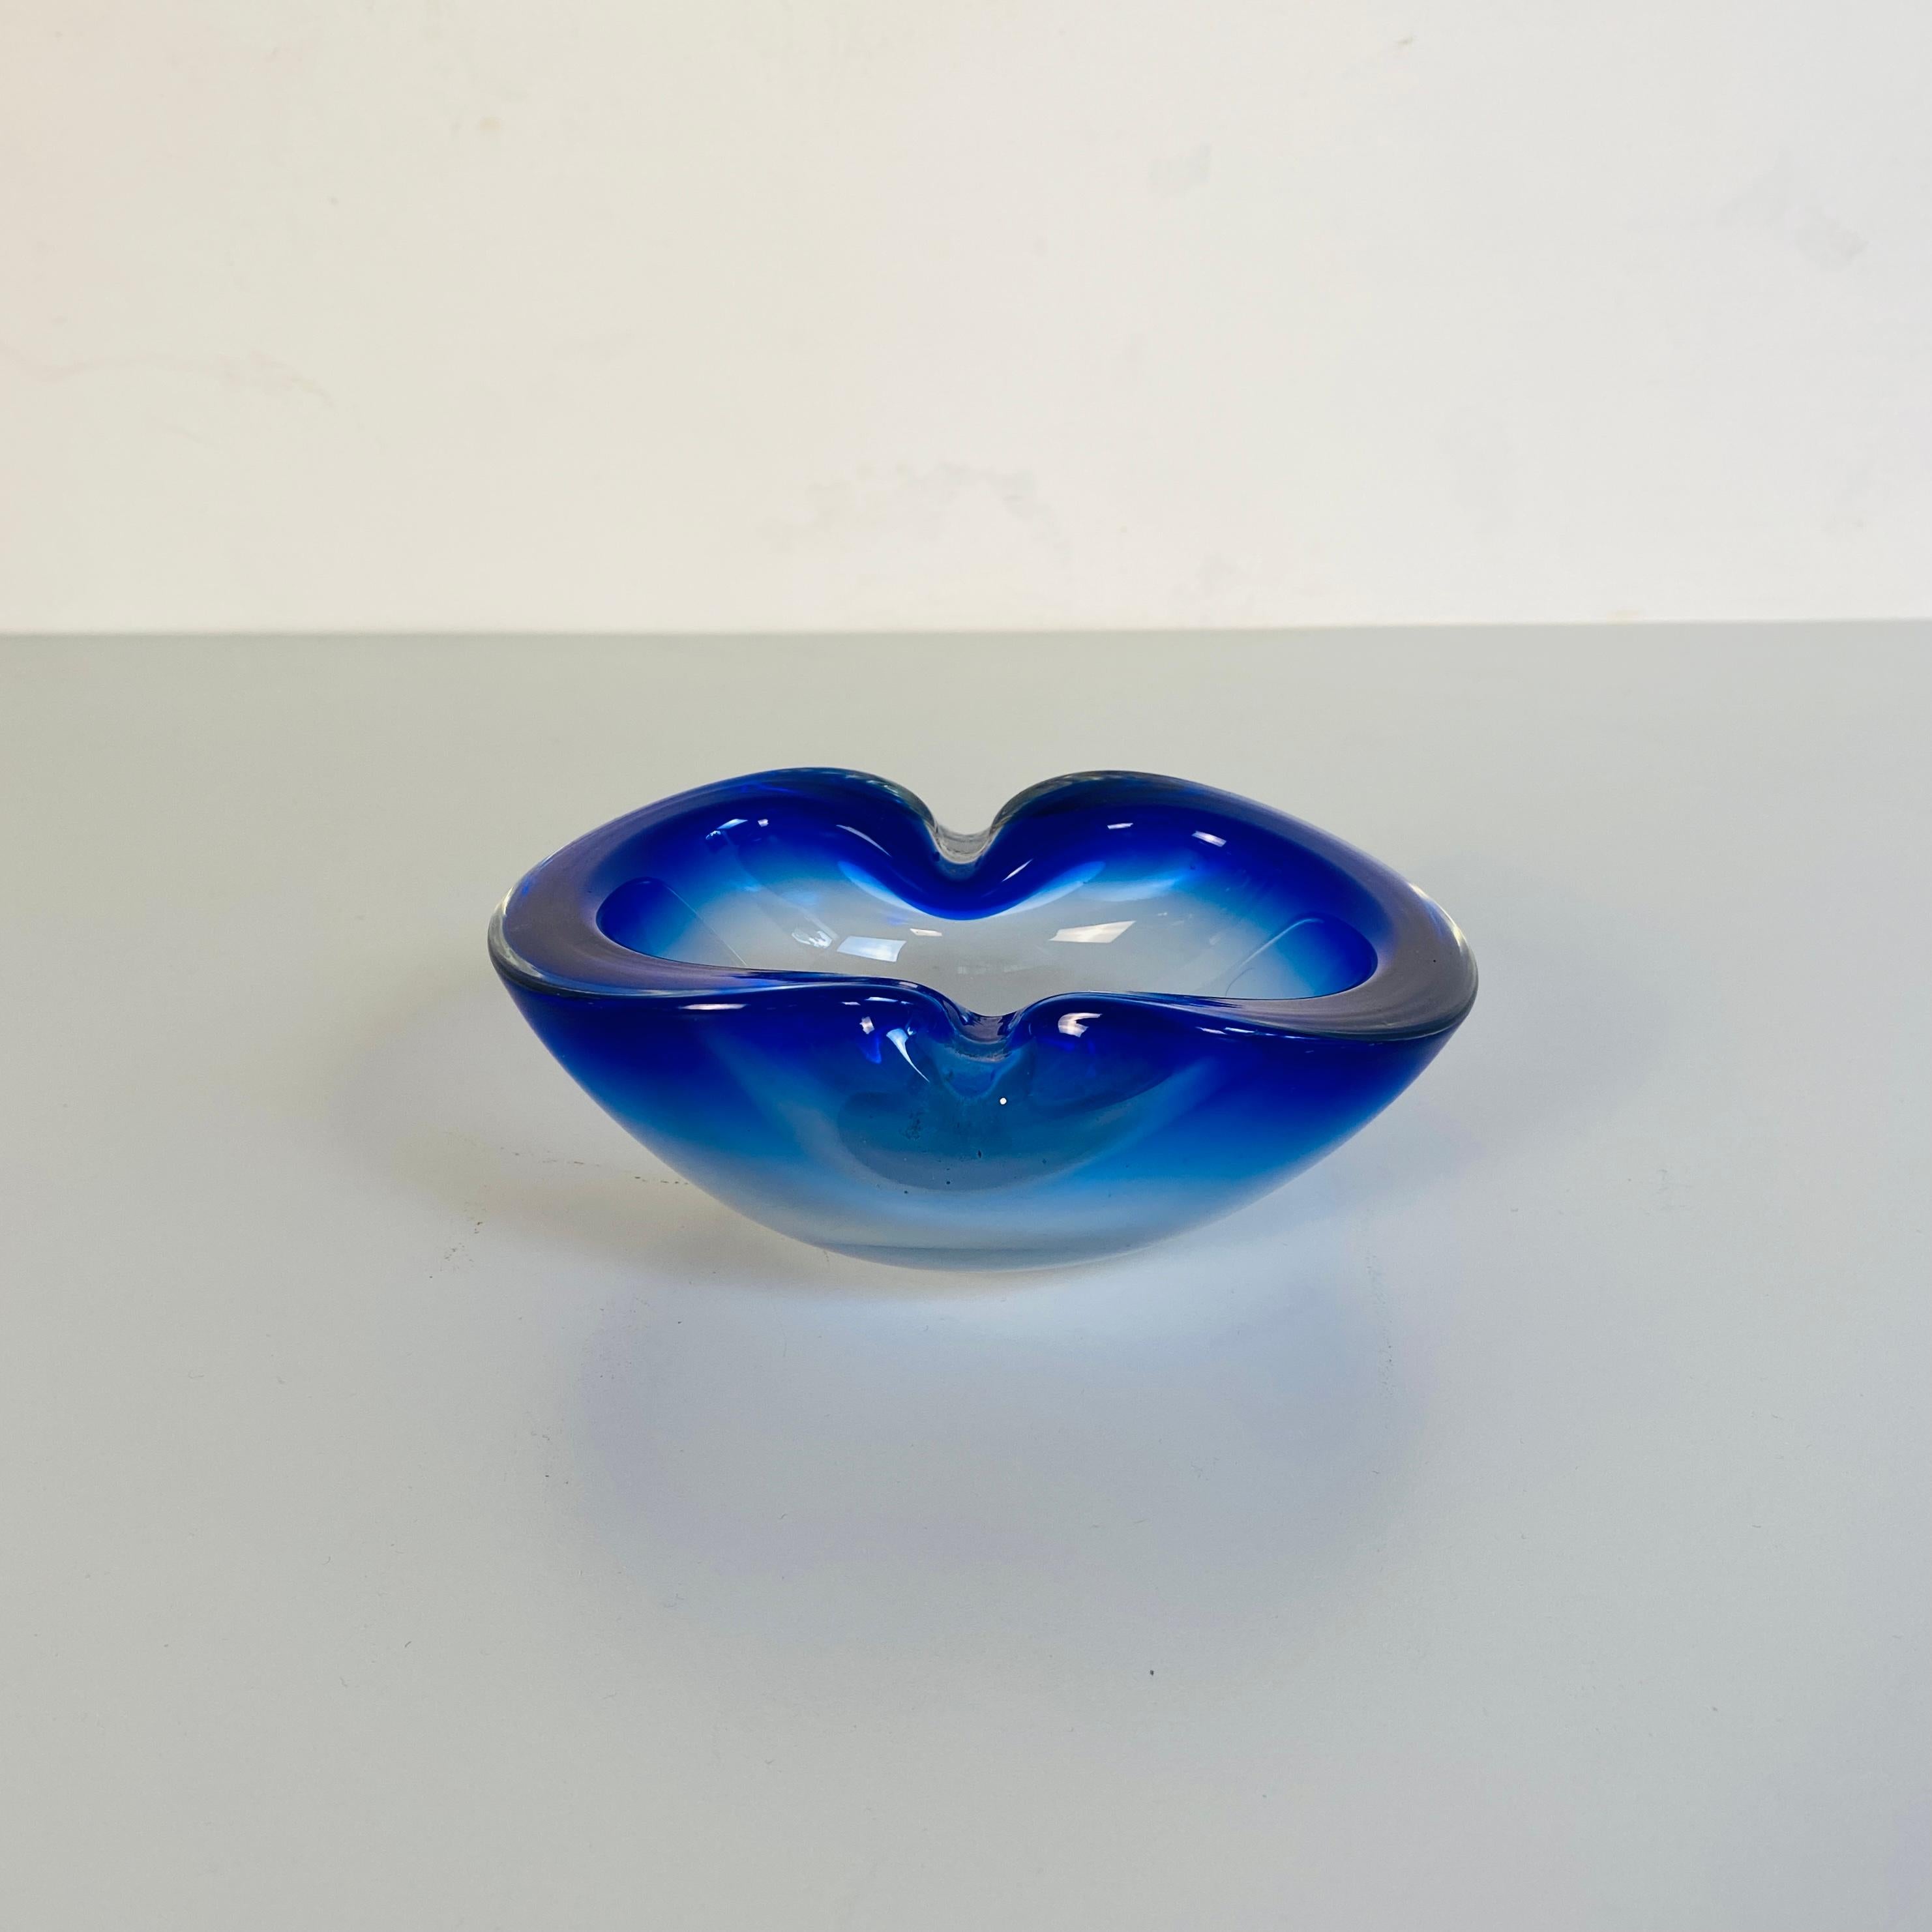 Late 20th Century Italian Mid-Century Modern Murano Glass Oval Object Holder in Blue, 1970s For Sale